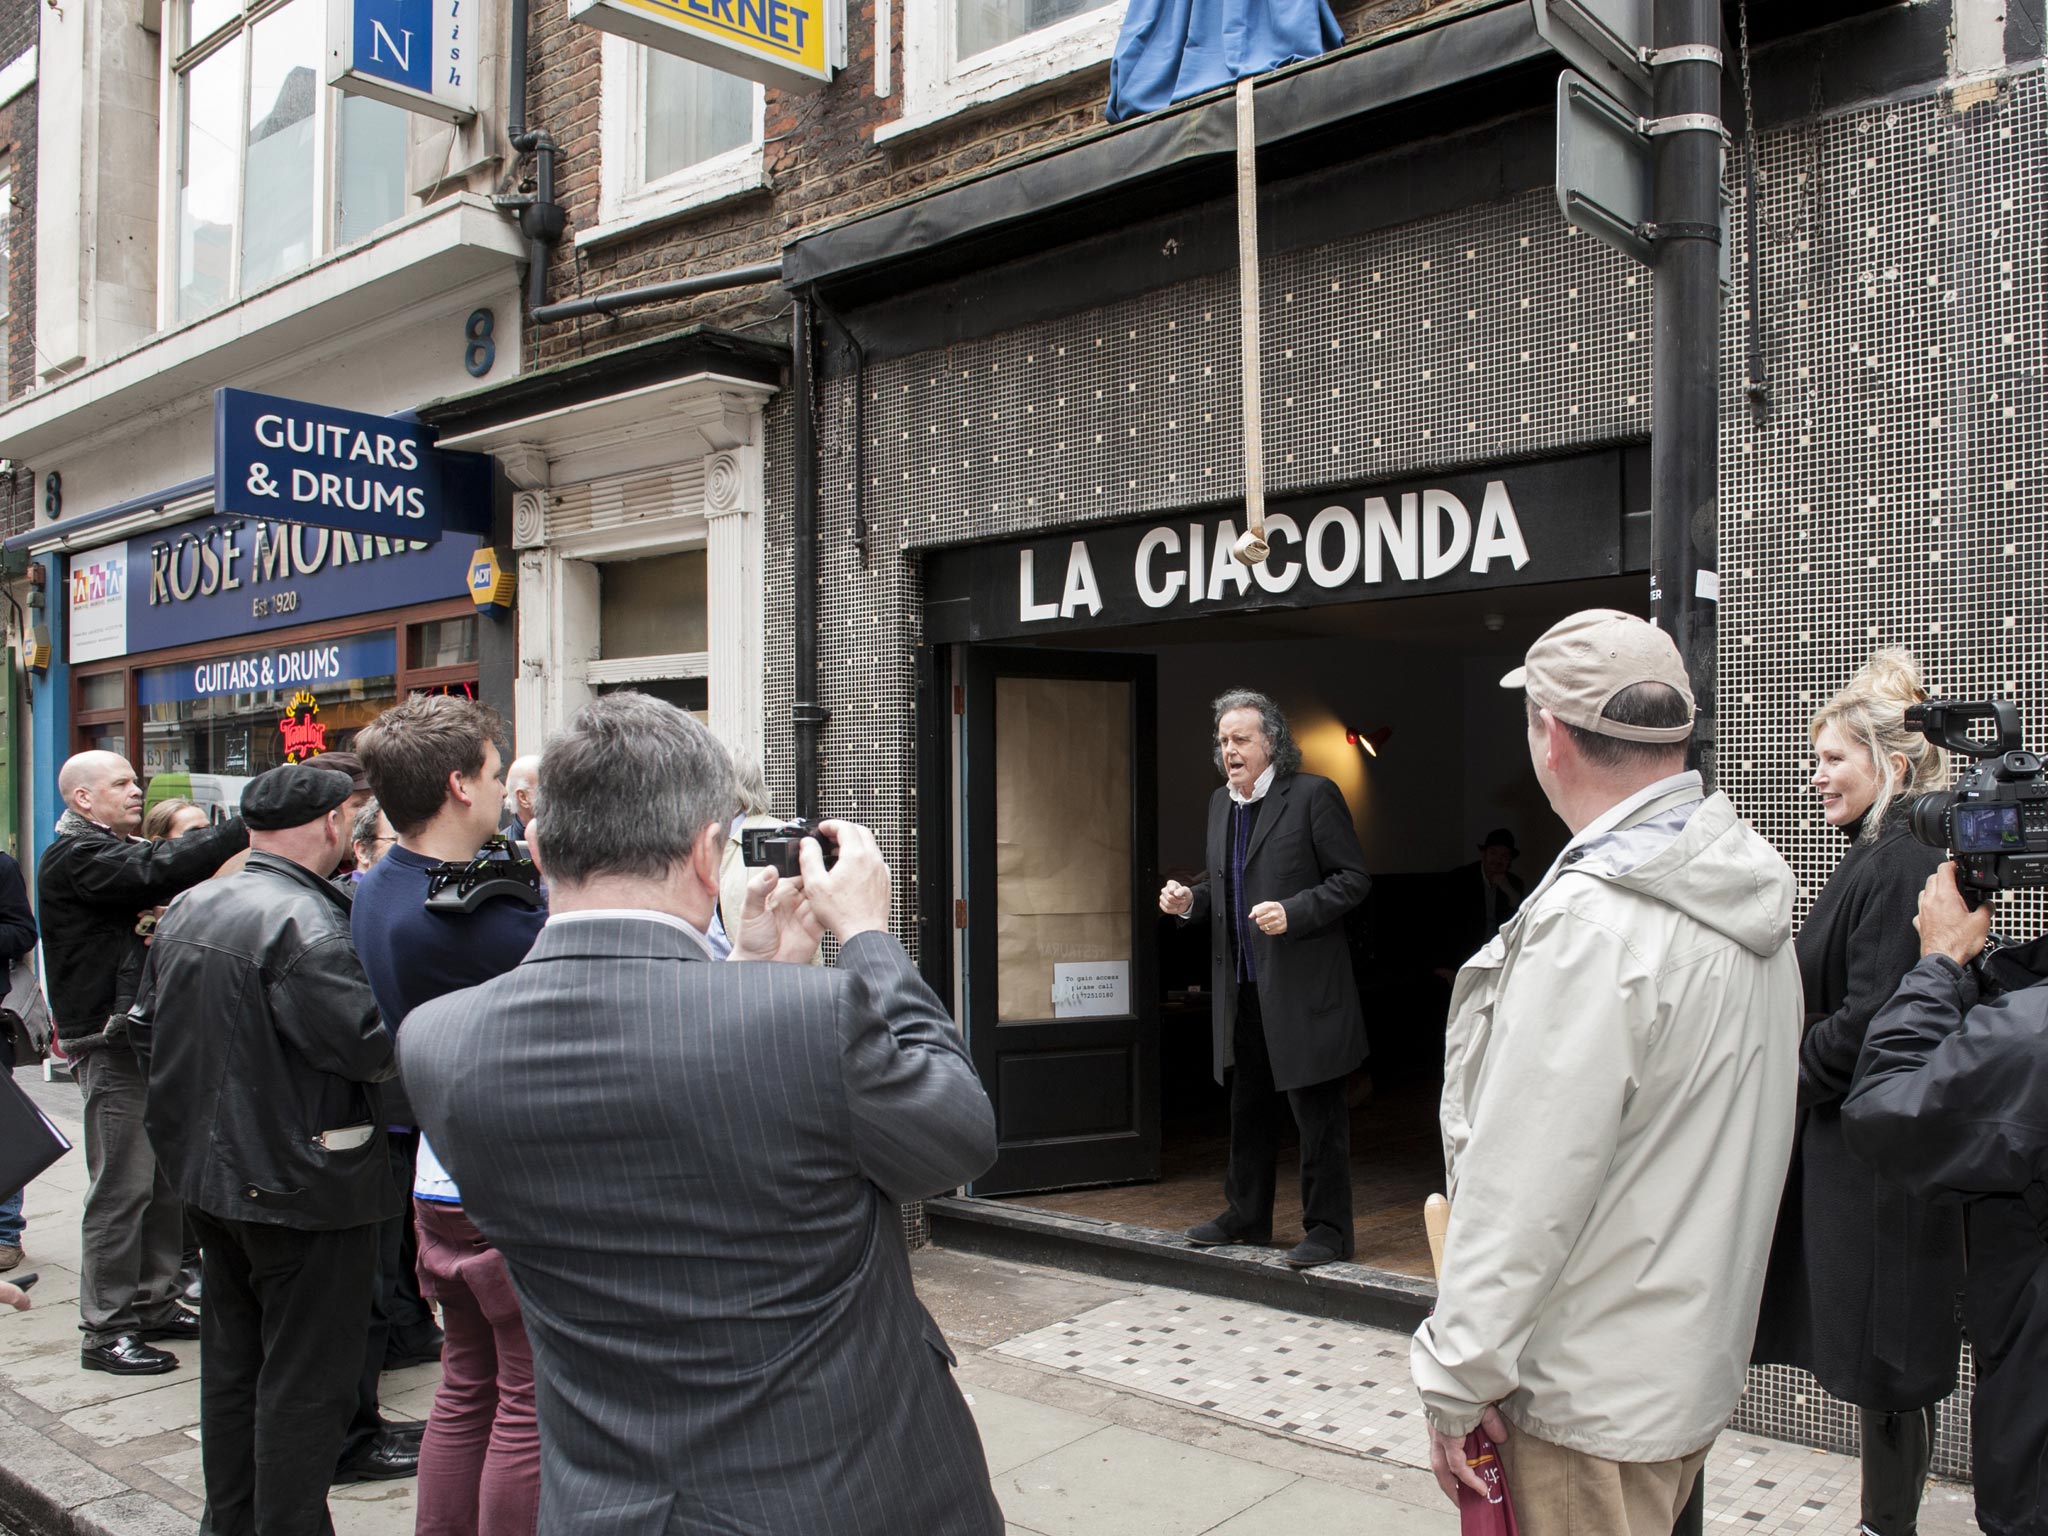 Donovan performs his new song, “Tin Pan Alley”, yesterday in Denmark Street, London, where a blue plaque was unveiled